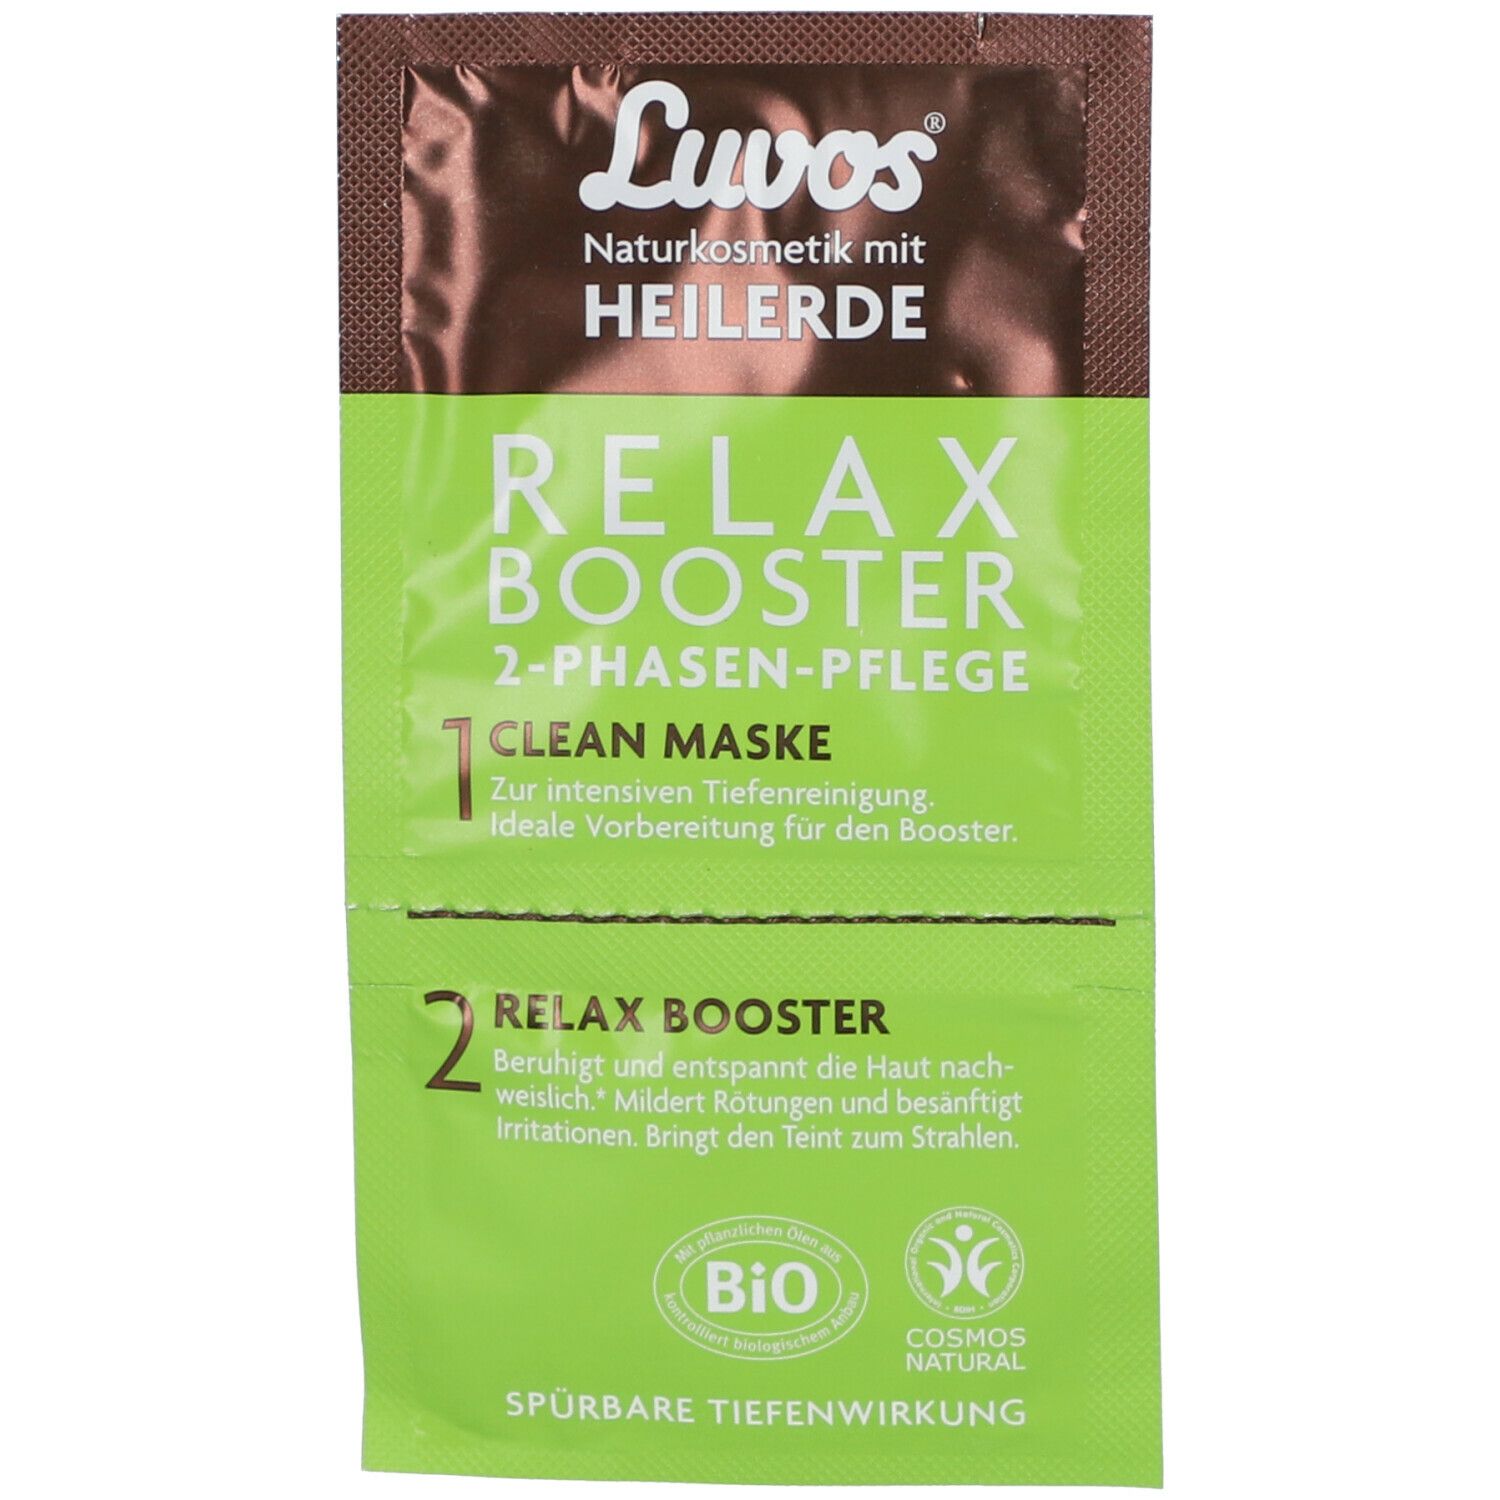 Terre médicinale Luvos Relax Booster avec masque Clean, soin en 2 phases